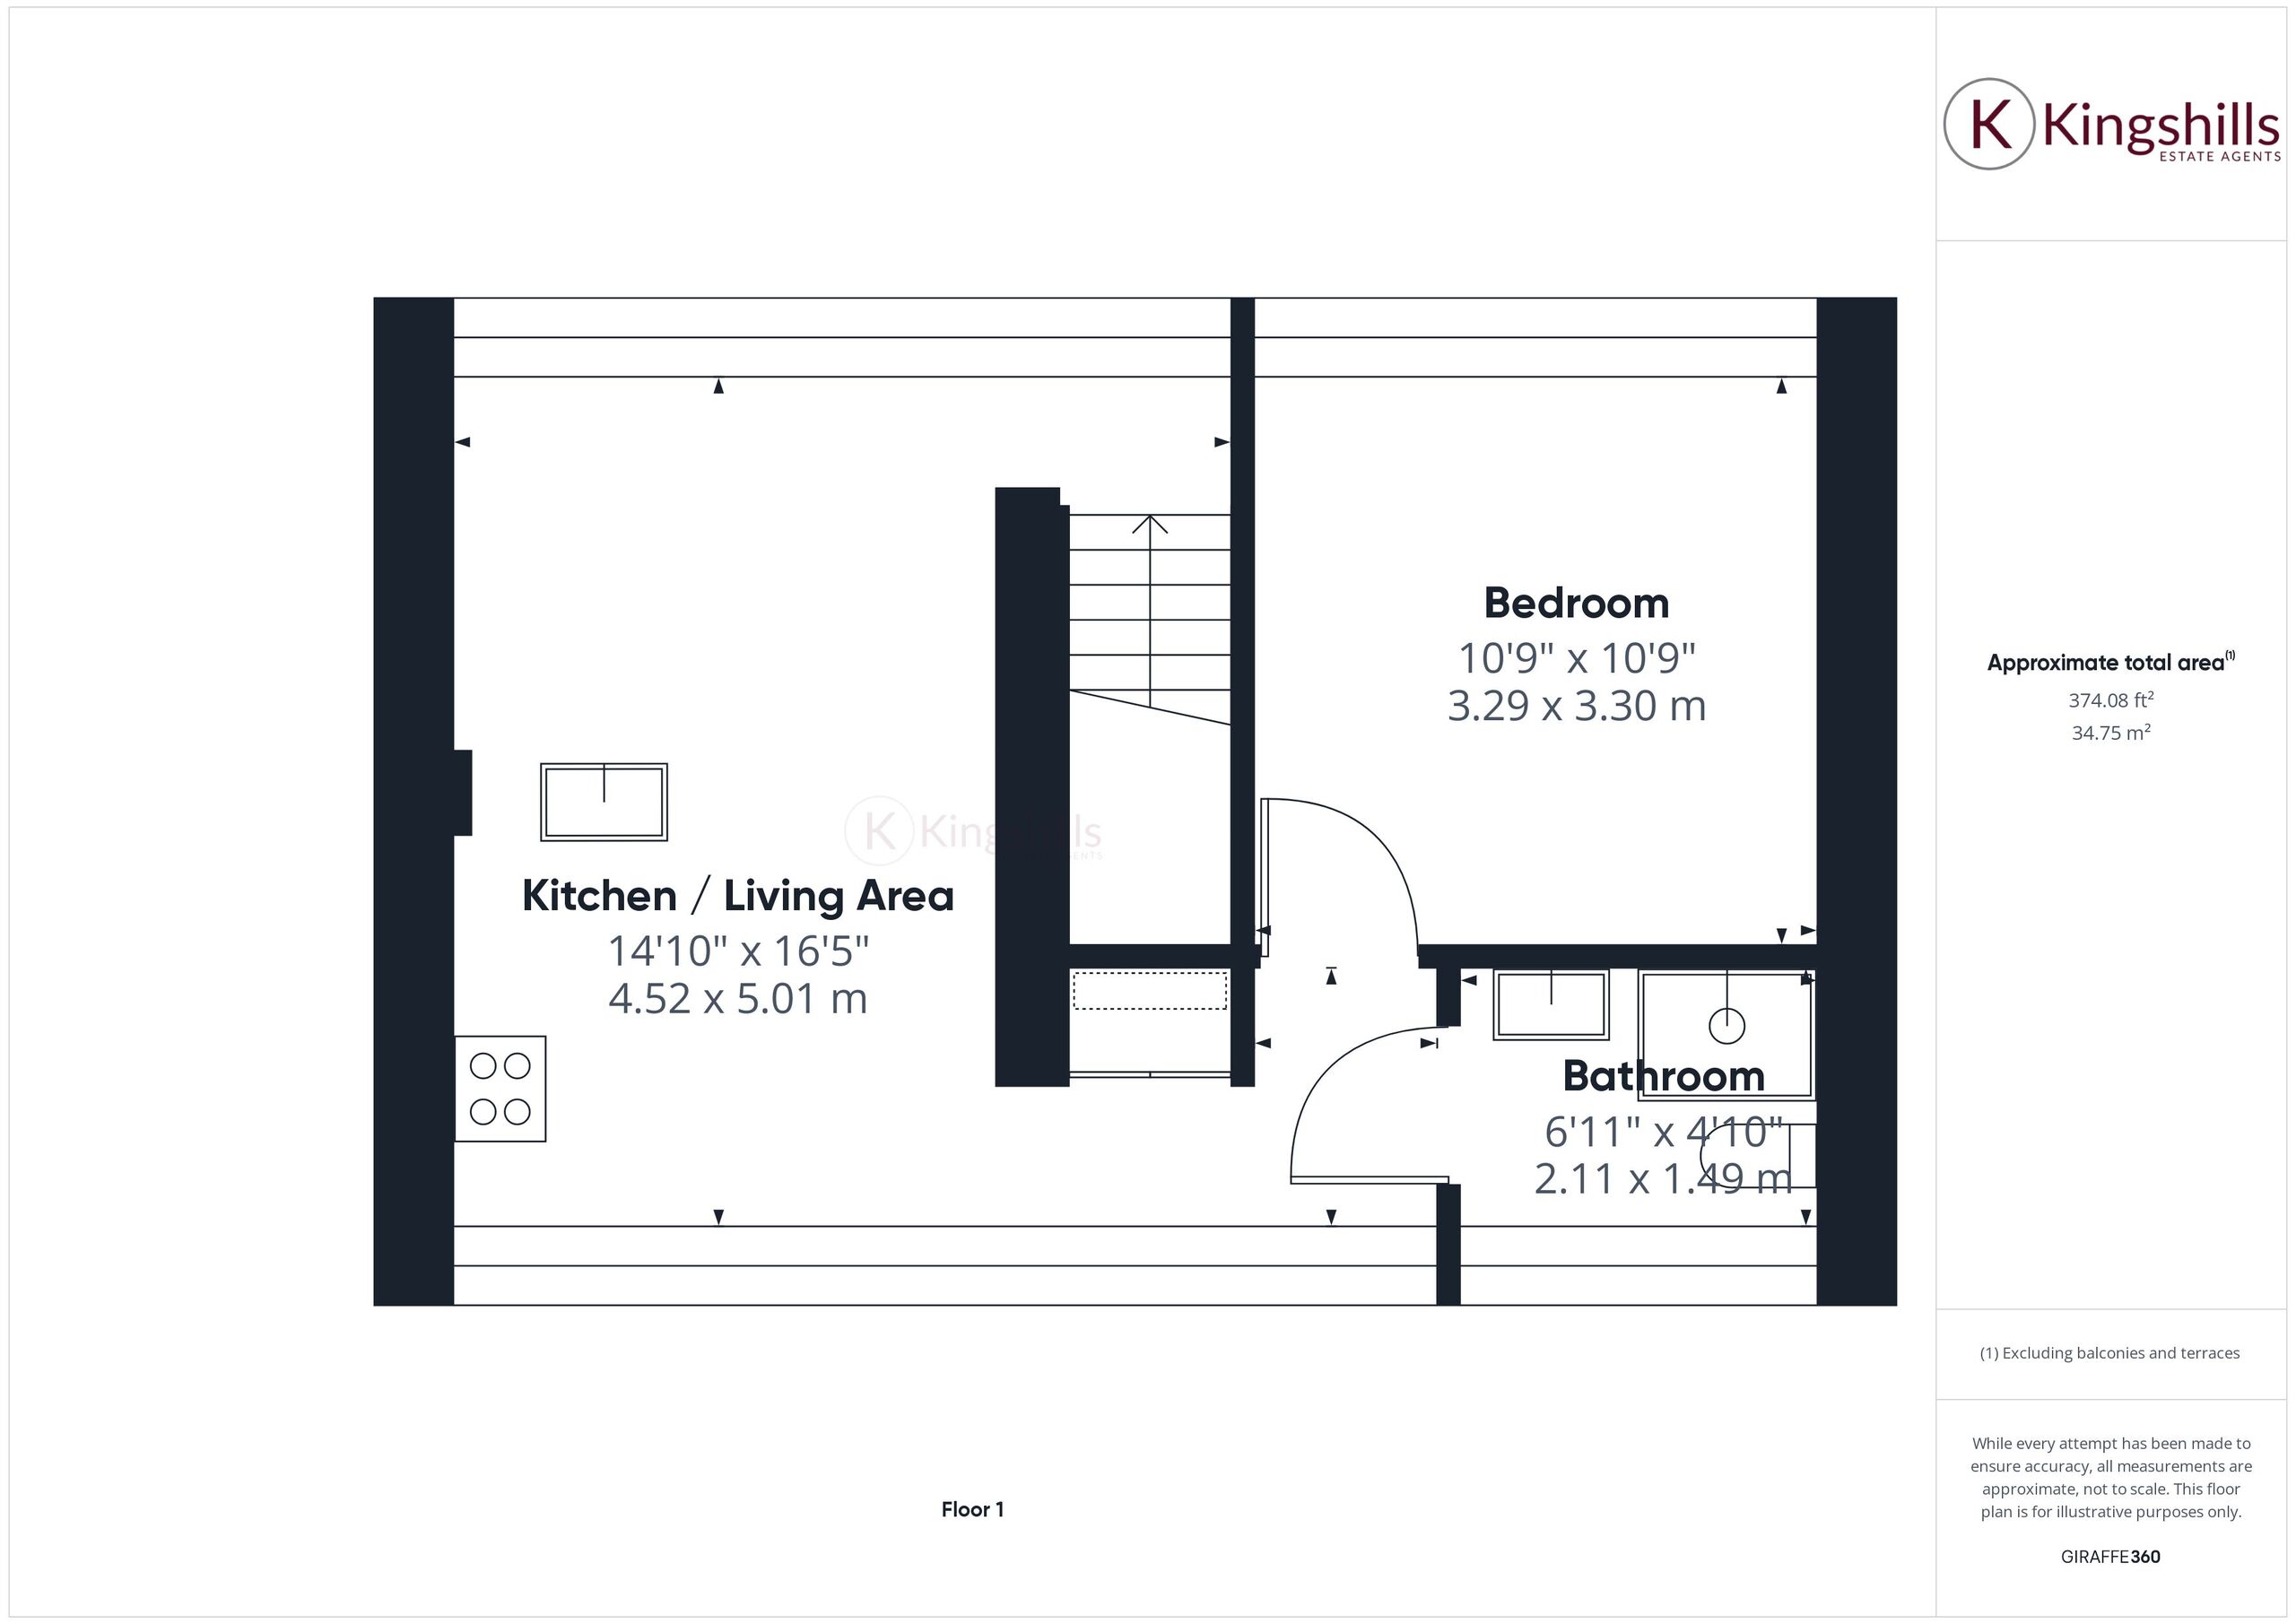 1 bed to rent in Four Ashes Road, High Wycombe - Property floorplan